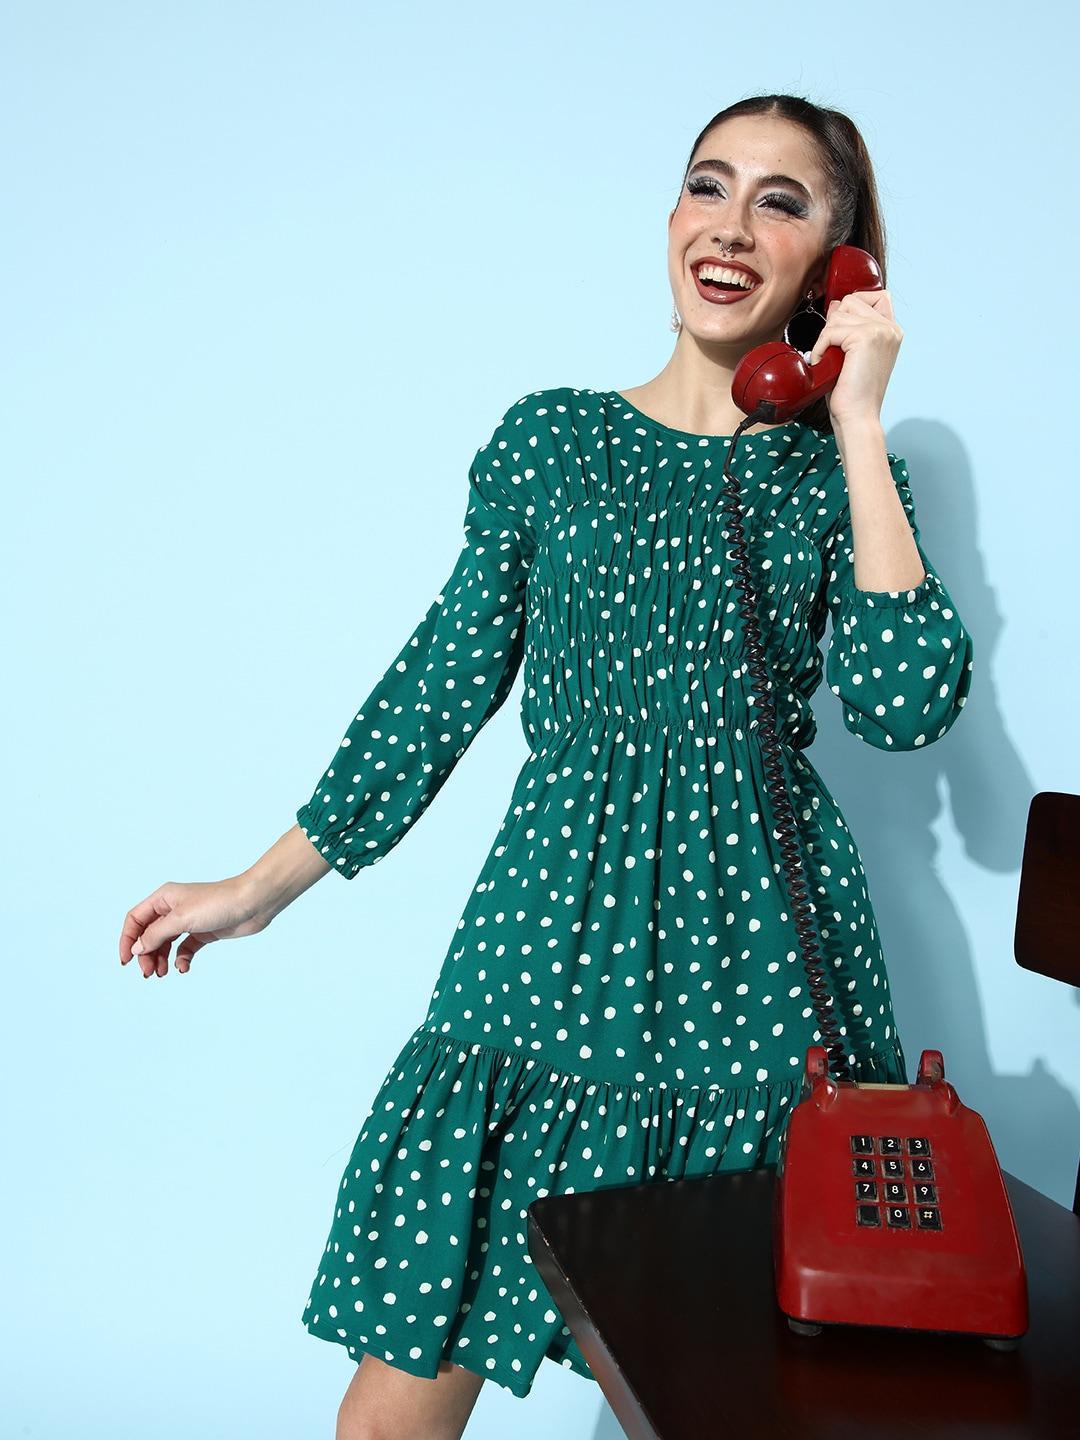 stylestone women  green polka dotted once upon a sleeve dress